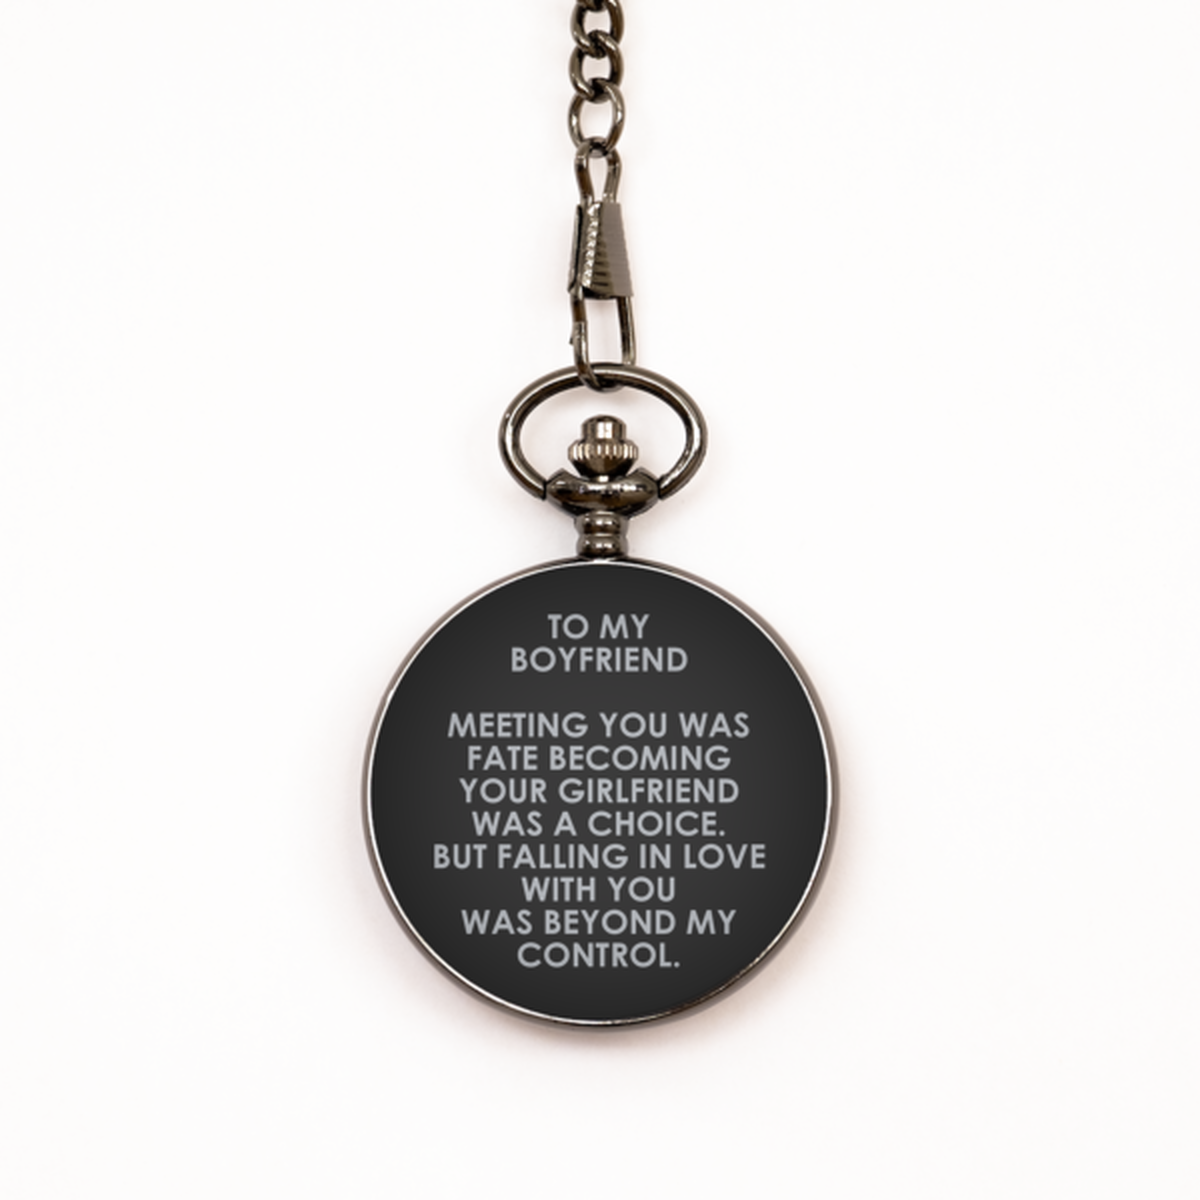 To My Boyfriend Black Pocket Watch, Meeting You Was Fate, Valentines  Gifts For Boyfriend From Girlfriend, Birthday Gifts For Men